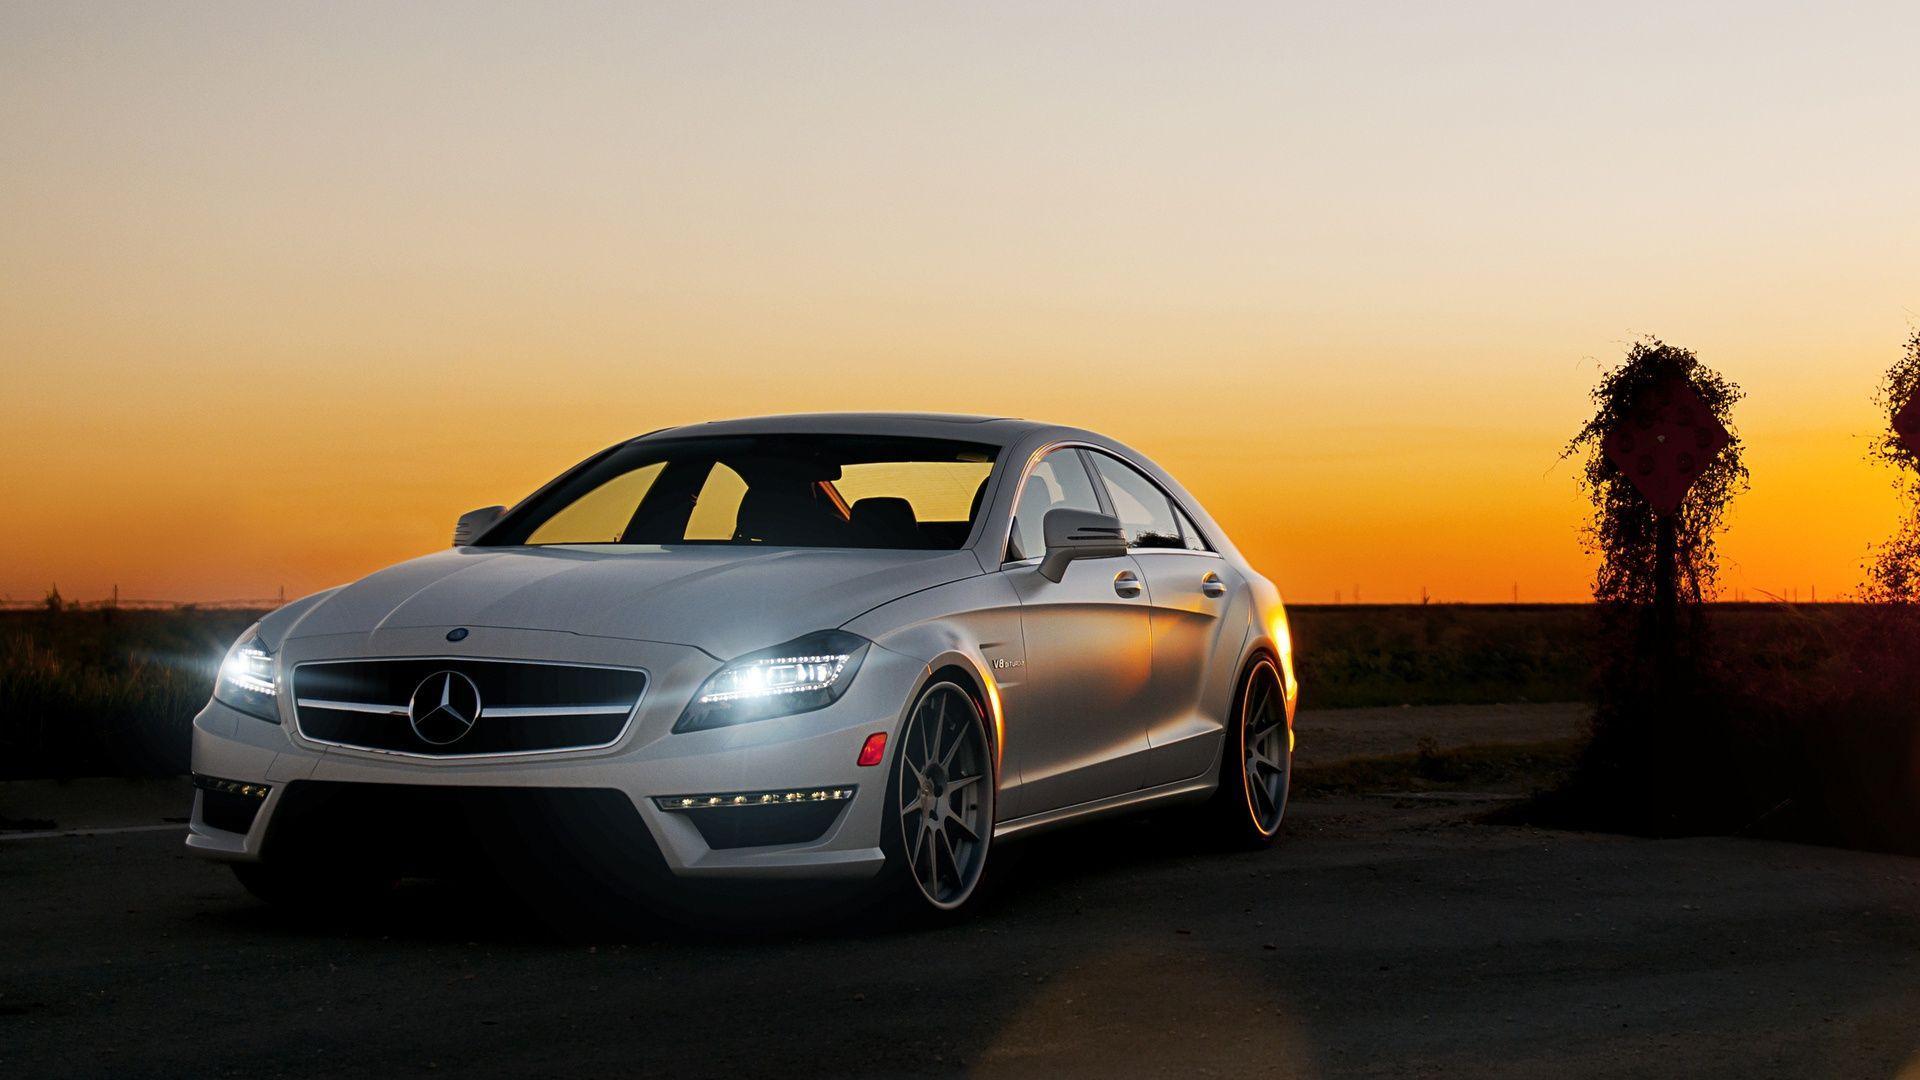 HD Mercedes Benz Wallpapers Group